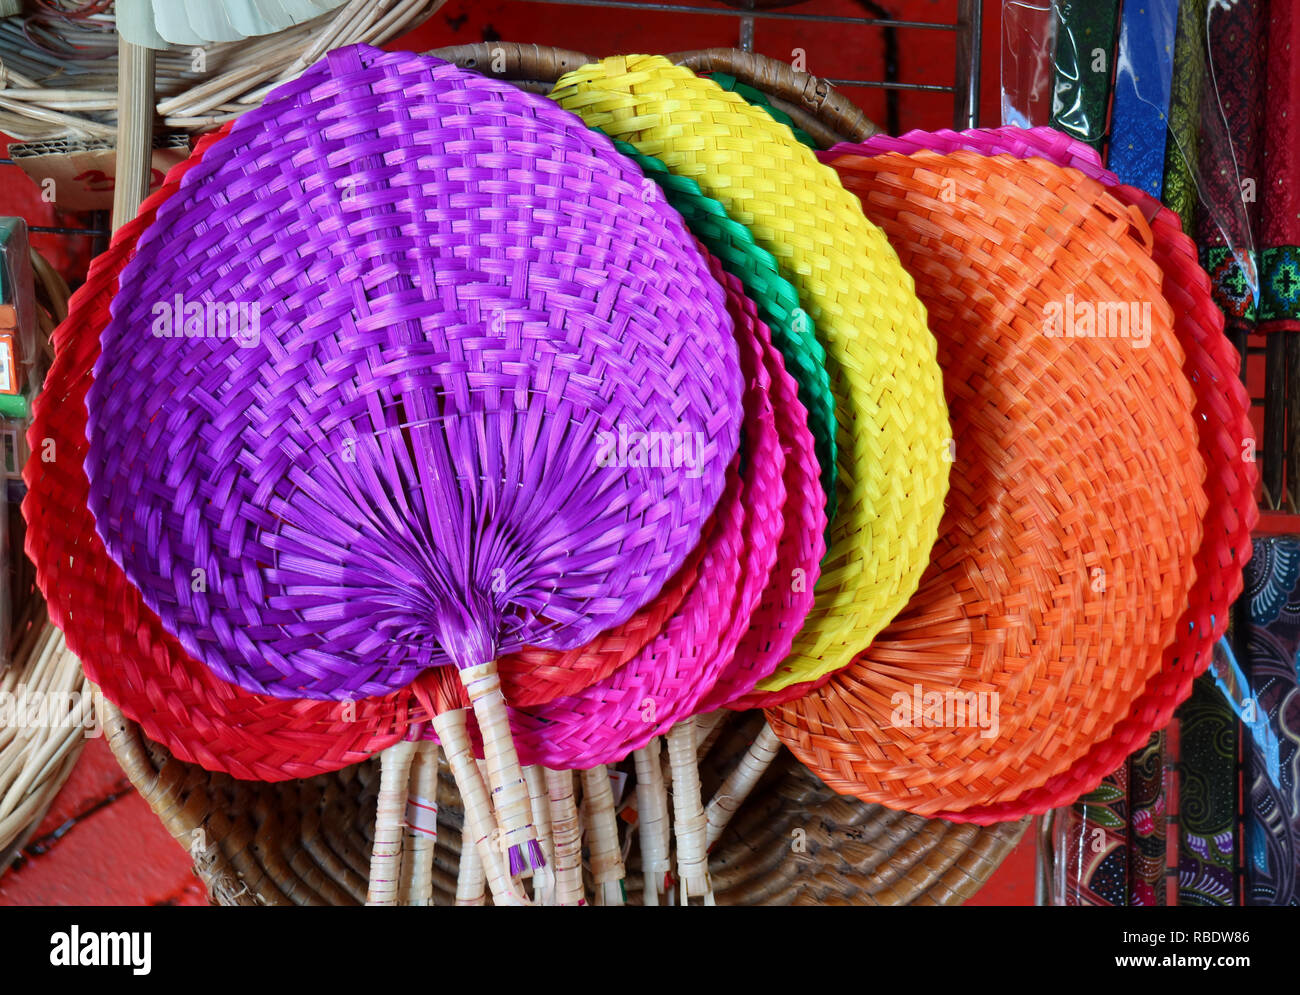 Colorful handmade natural raffia fans displayed in the shop at flea market in Thailand Stock Photo